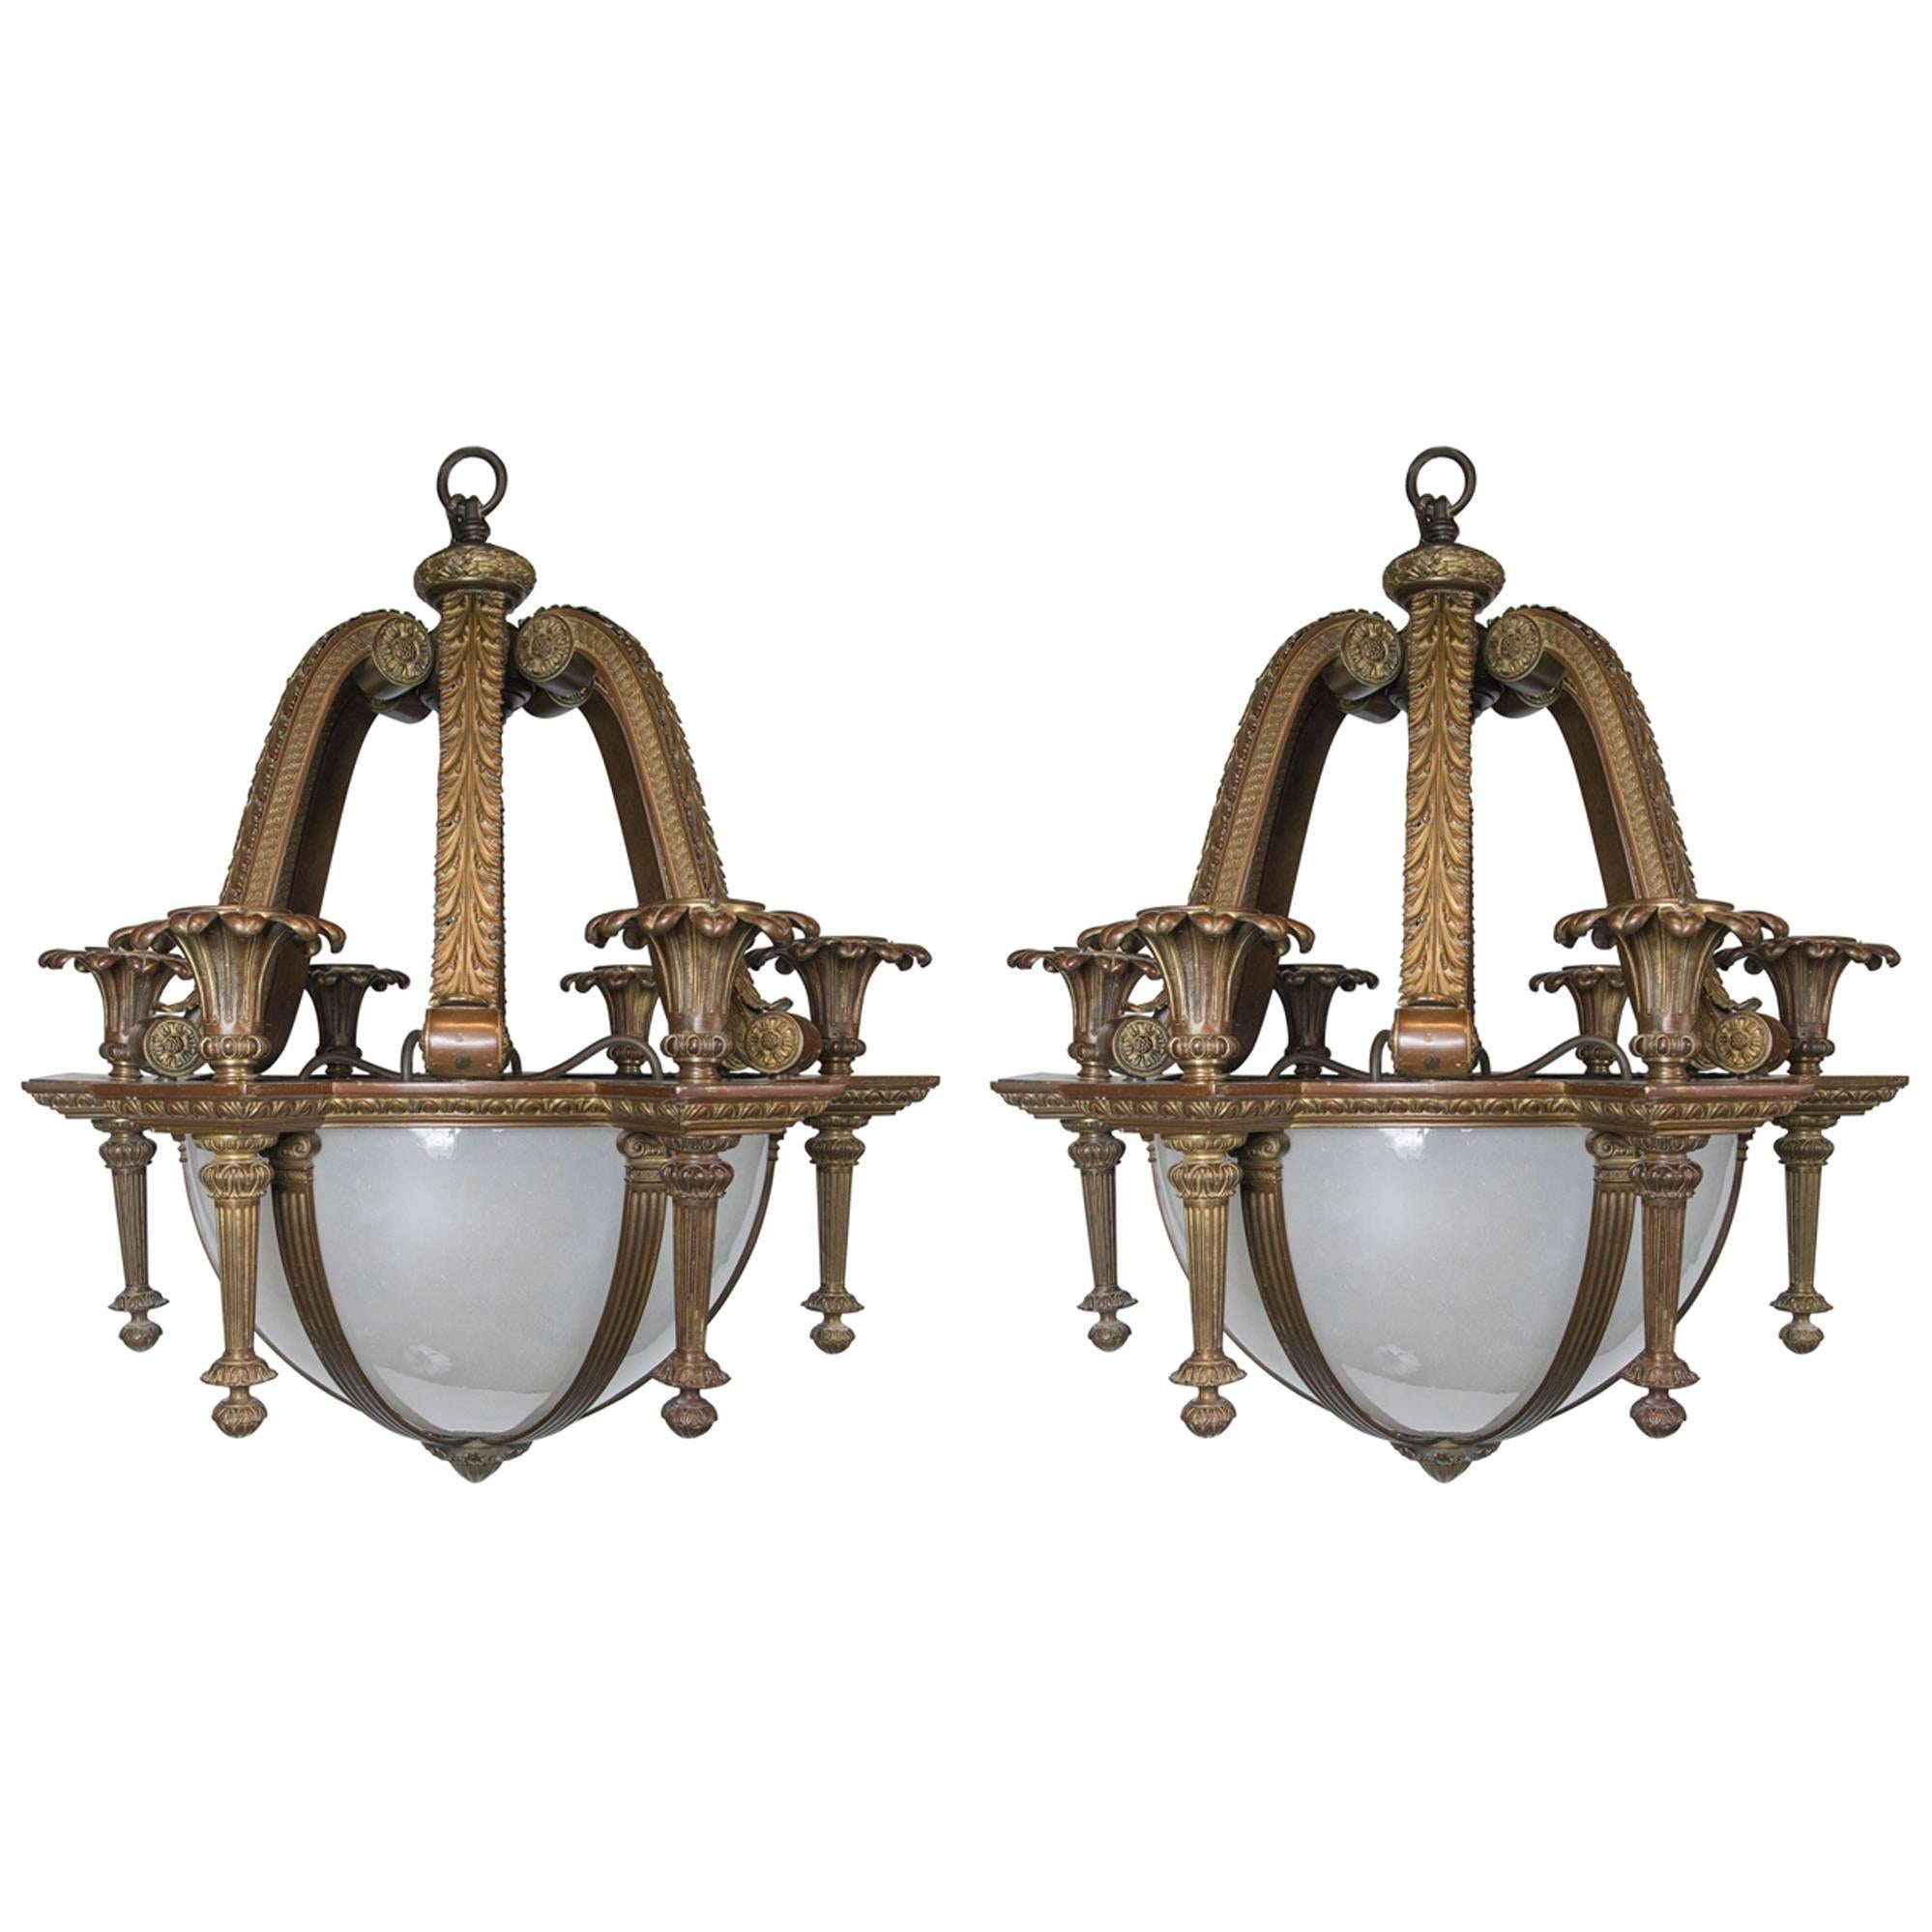 Pair of Neoclassic Style Caldwell Chandeliers with Opaline Glass Panels Inset For Sale